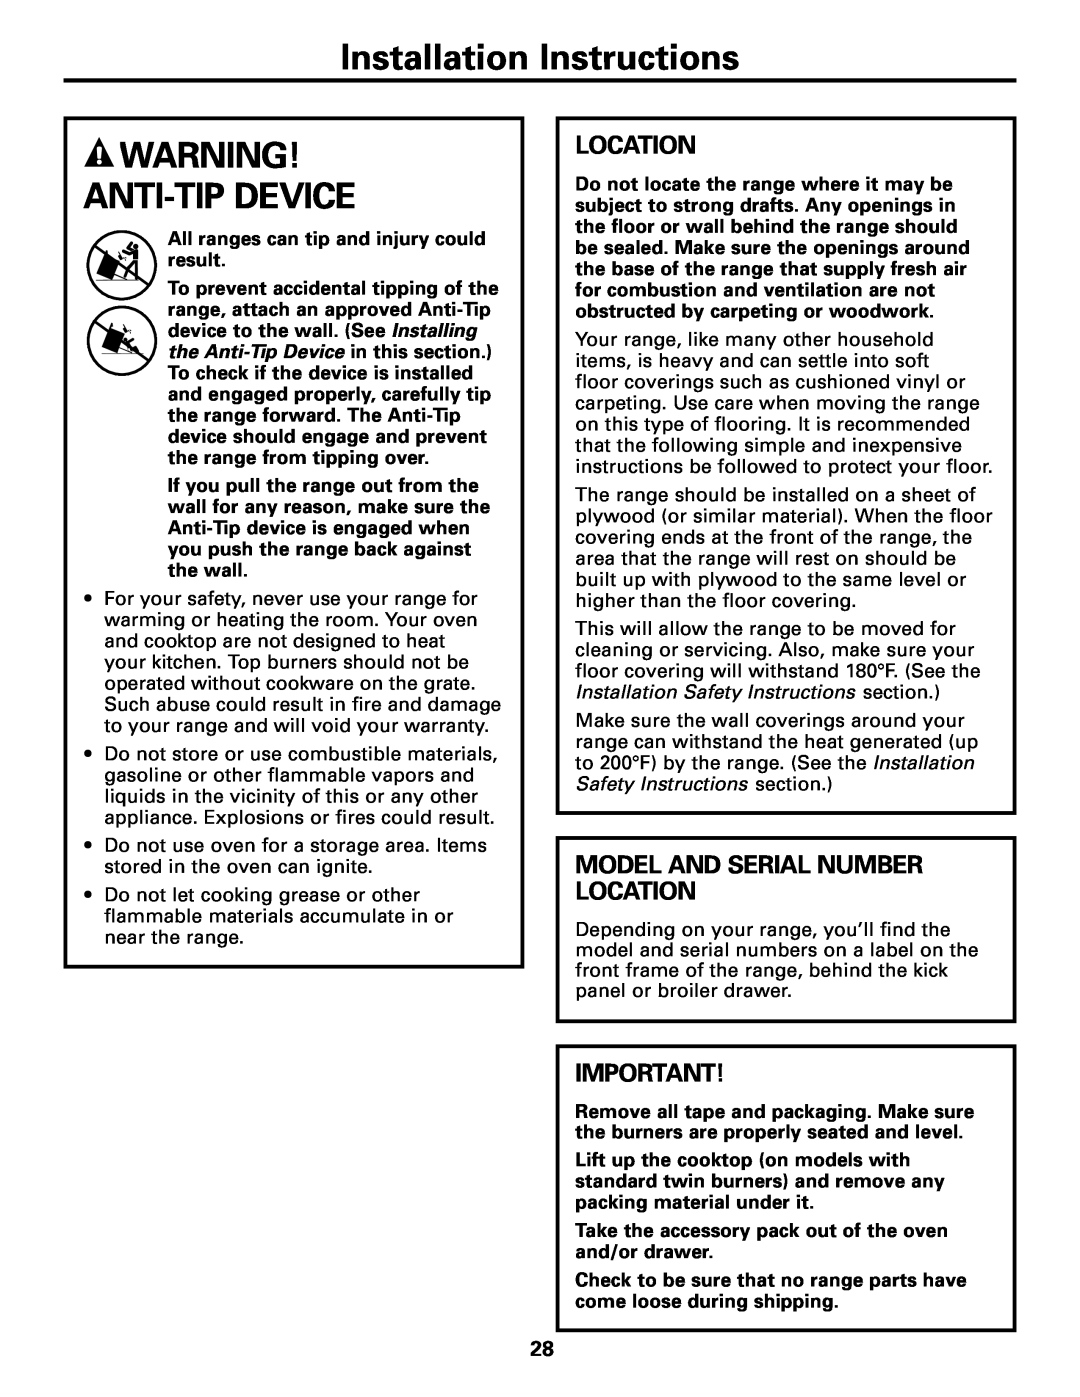 GE JGBC20 installation instructions Anti-Tipdevice, Model And Serial Number Location, Installation Instructions 